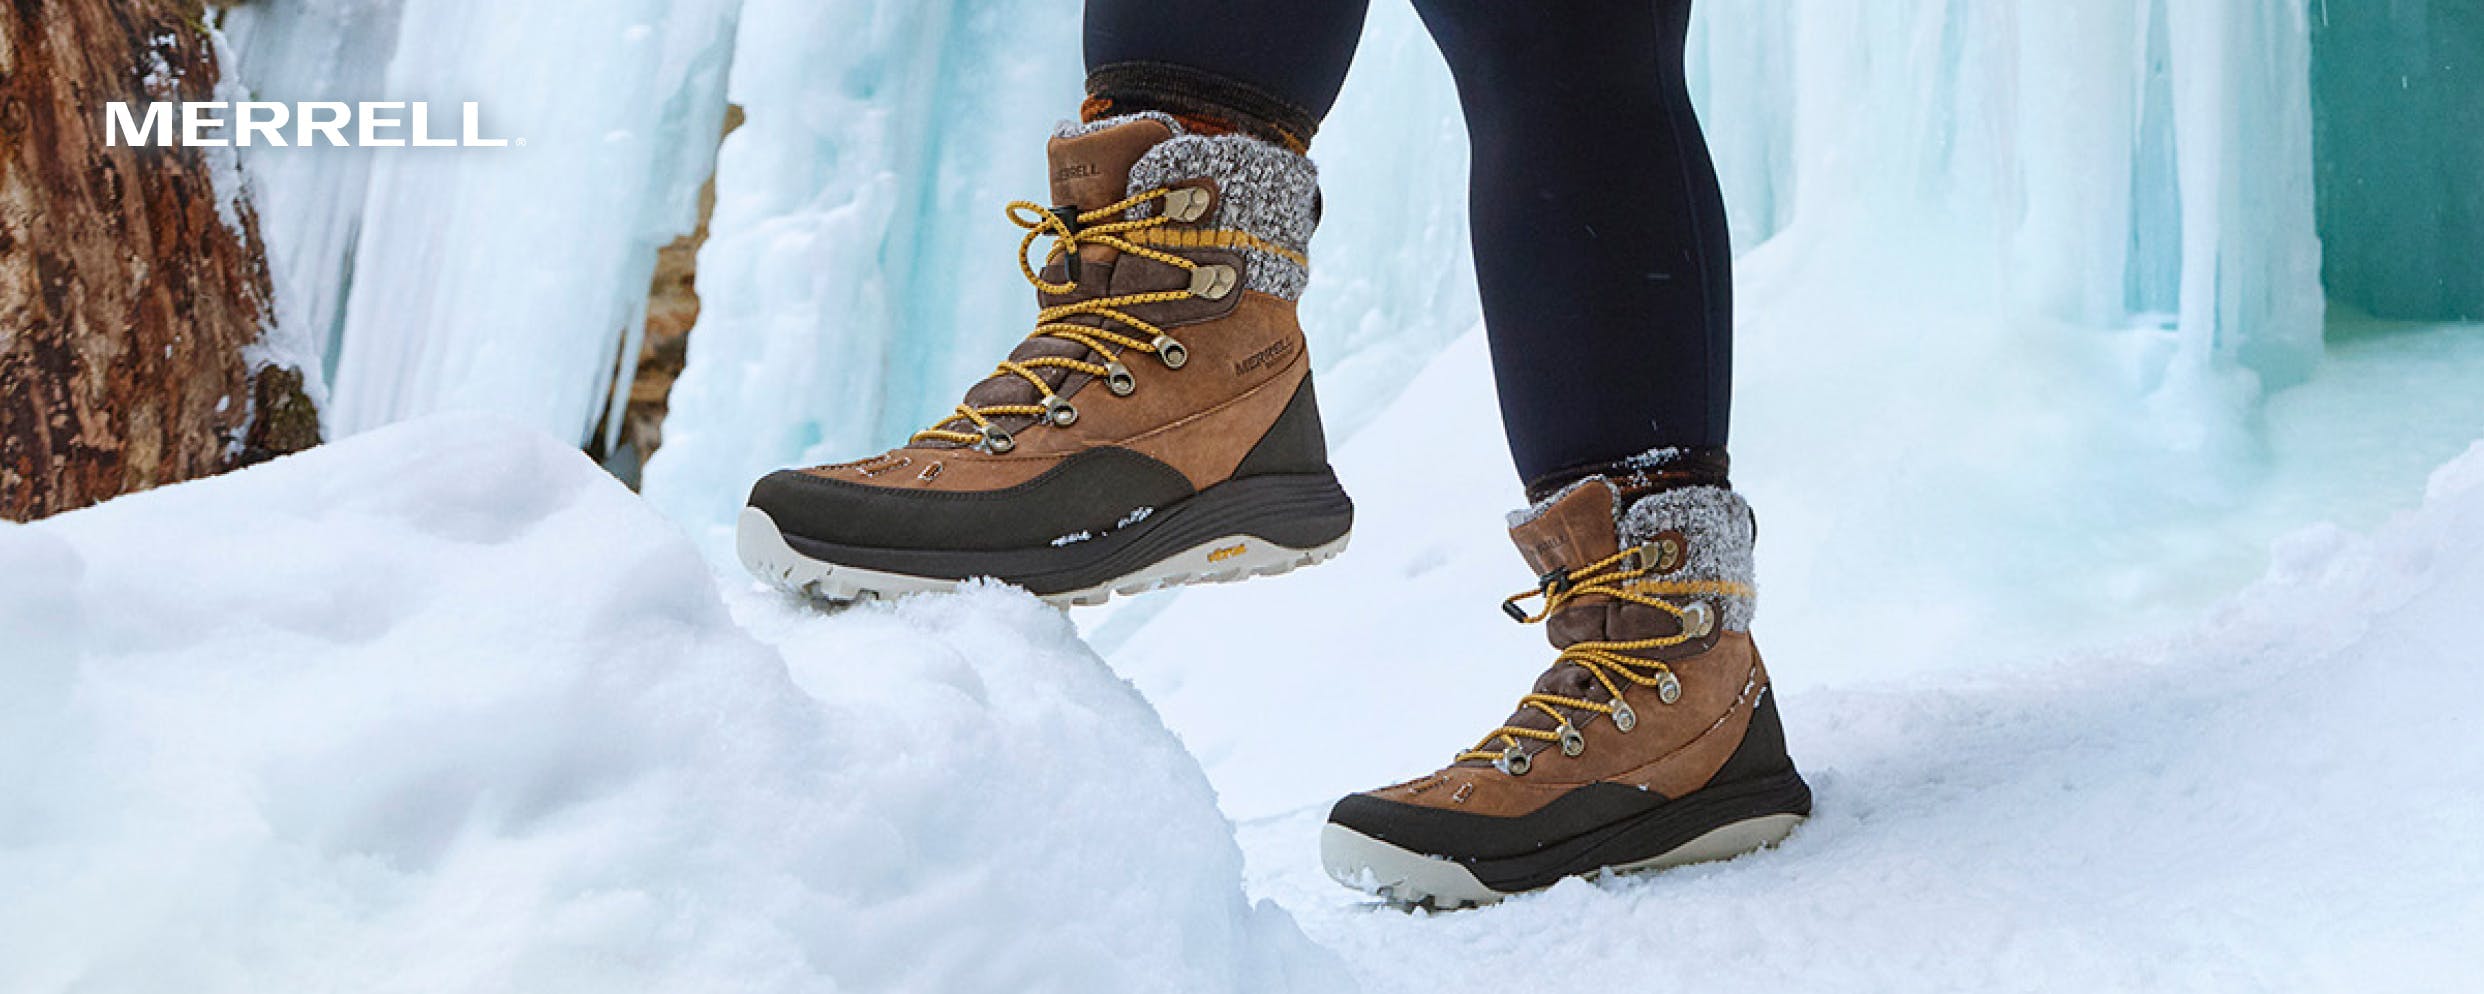 Get outside no matter the weather with Merrell hiking and winter-ready footwear.